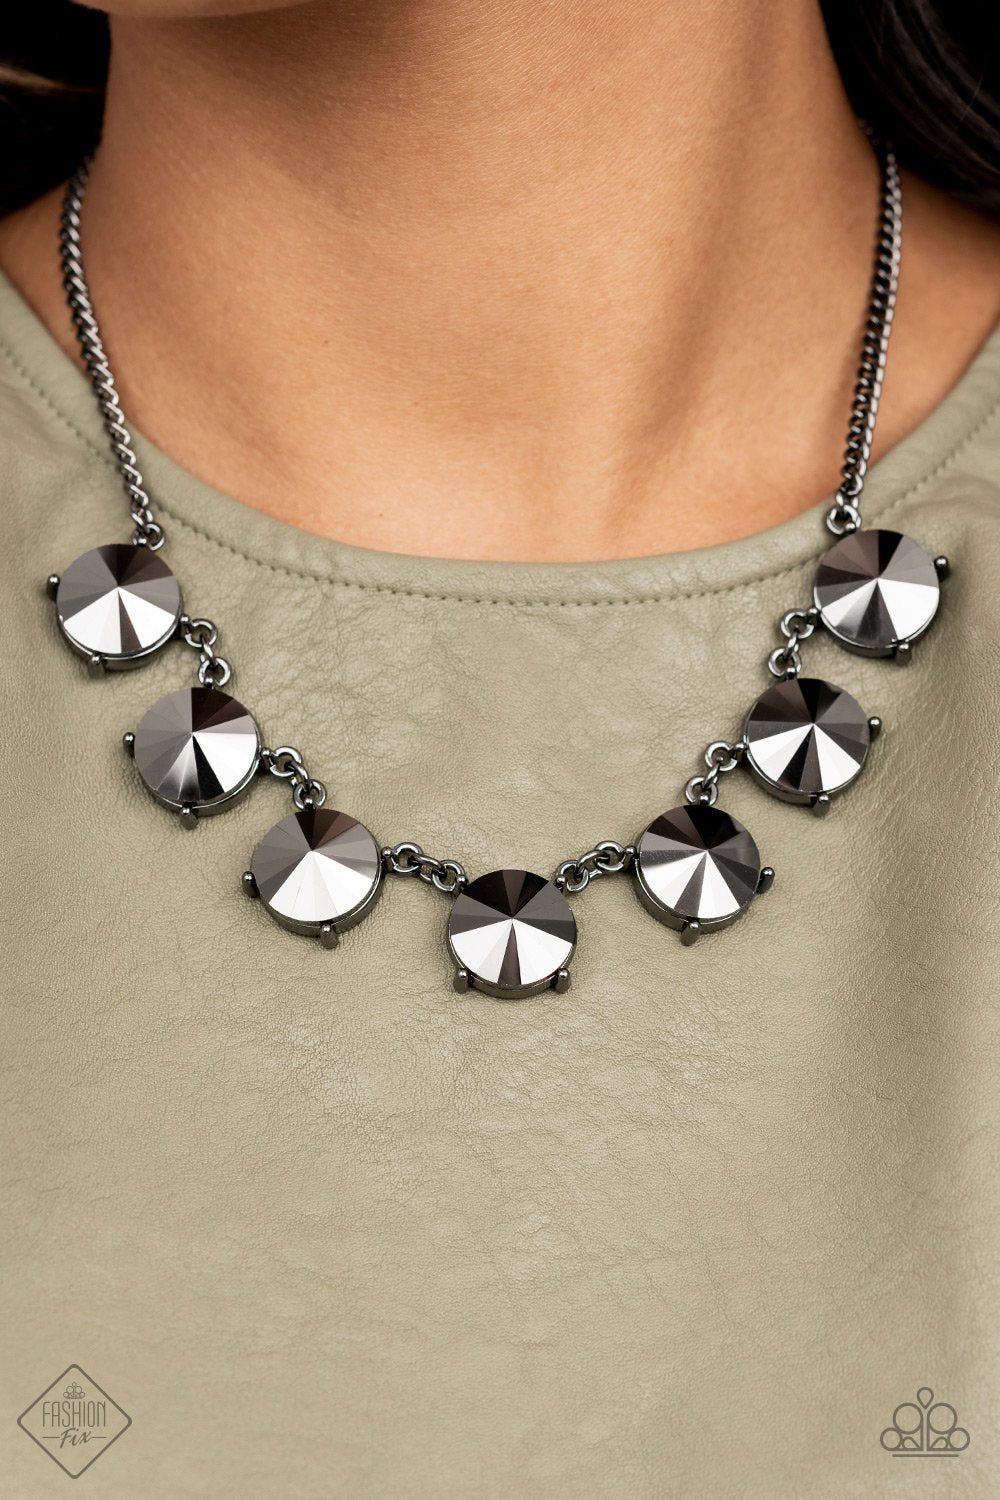 Paparazzi The SHOWCASE Must Go On Black Short Necklace - Fashion Fix Magnificent Musings September 2021